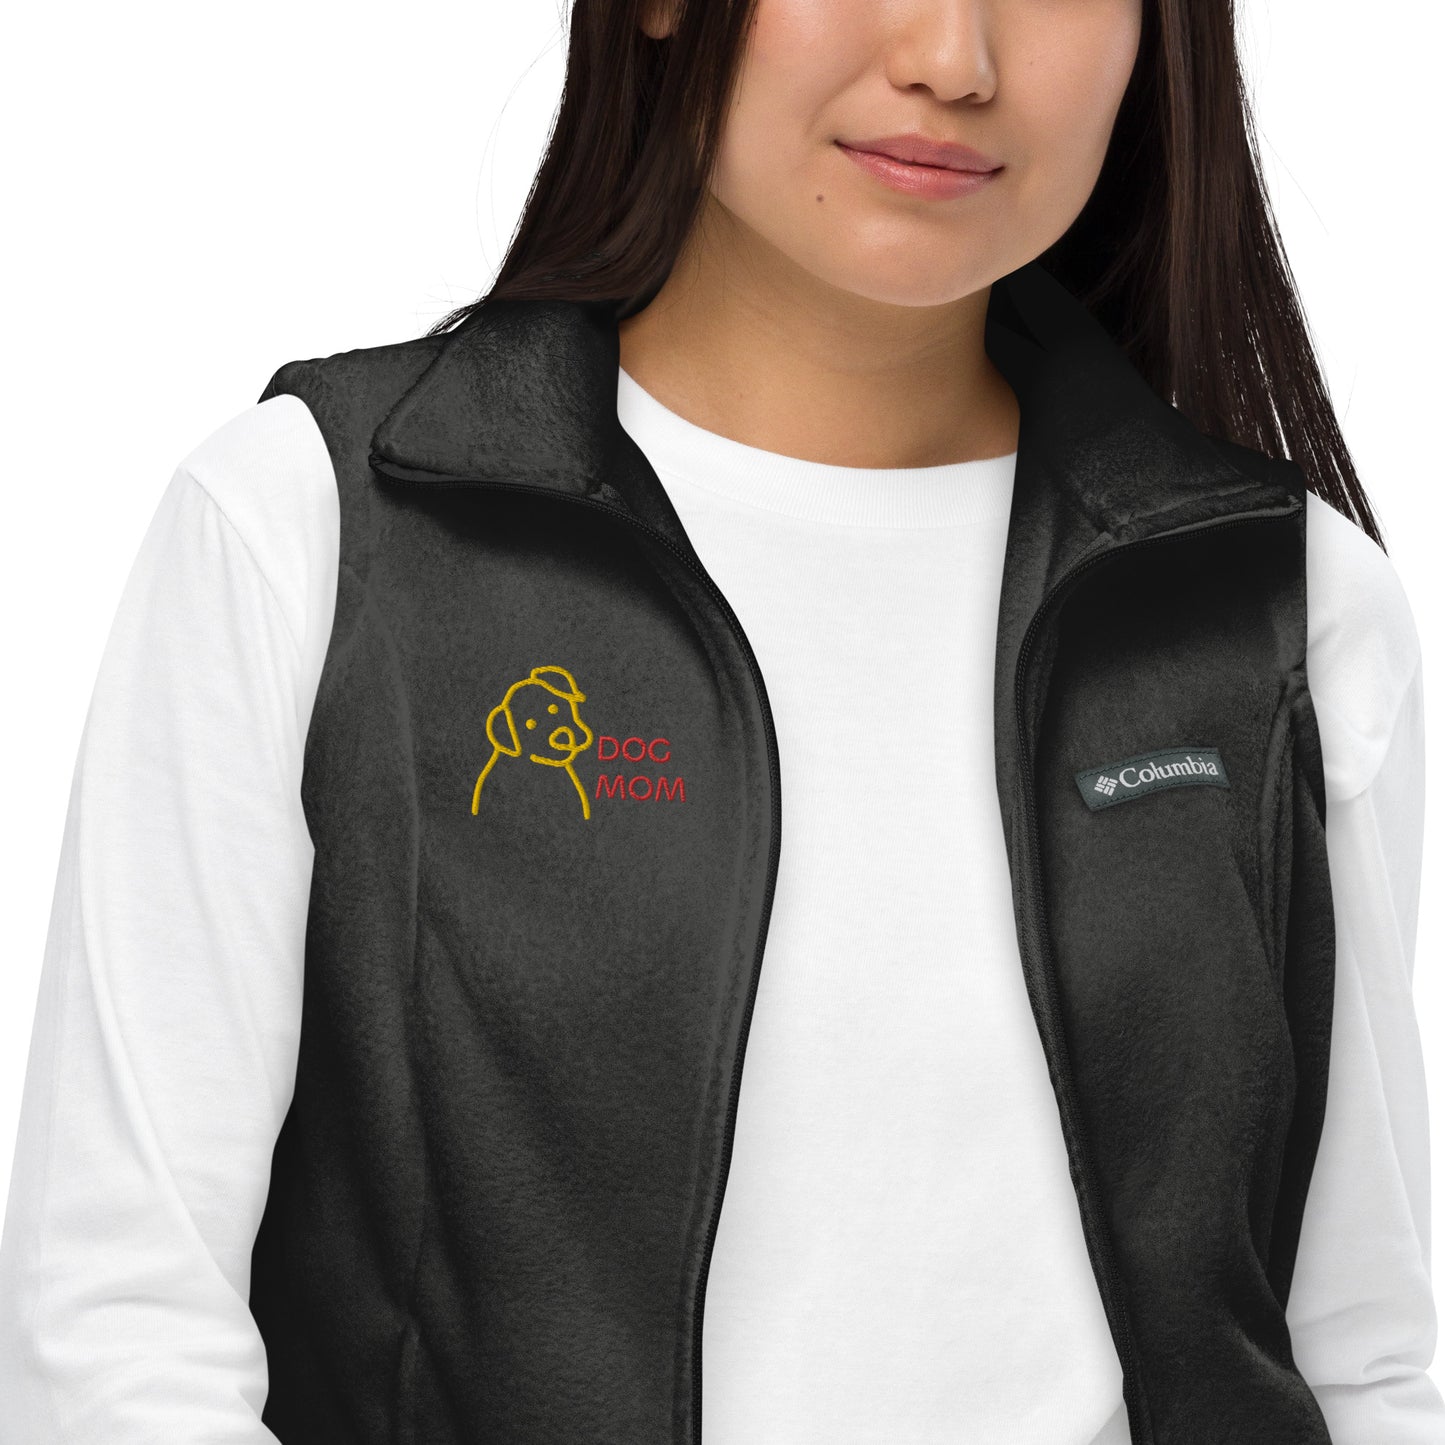 Women’s Columbia Fleece Vest, with flat embroidery gold/ red color "Dog Sketch/ Dog MOM"